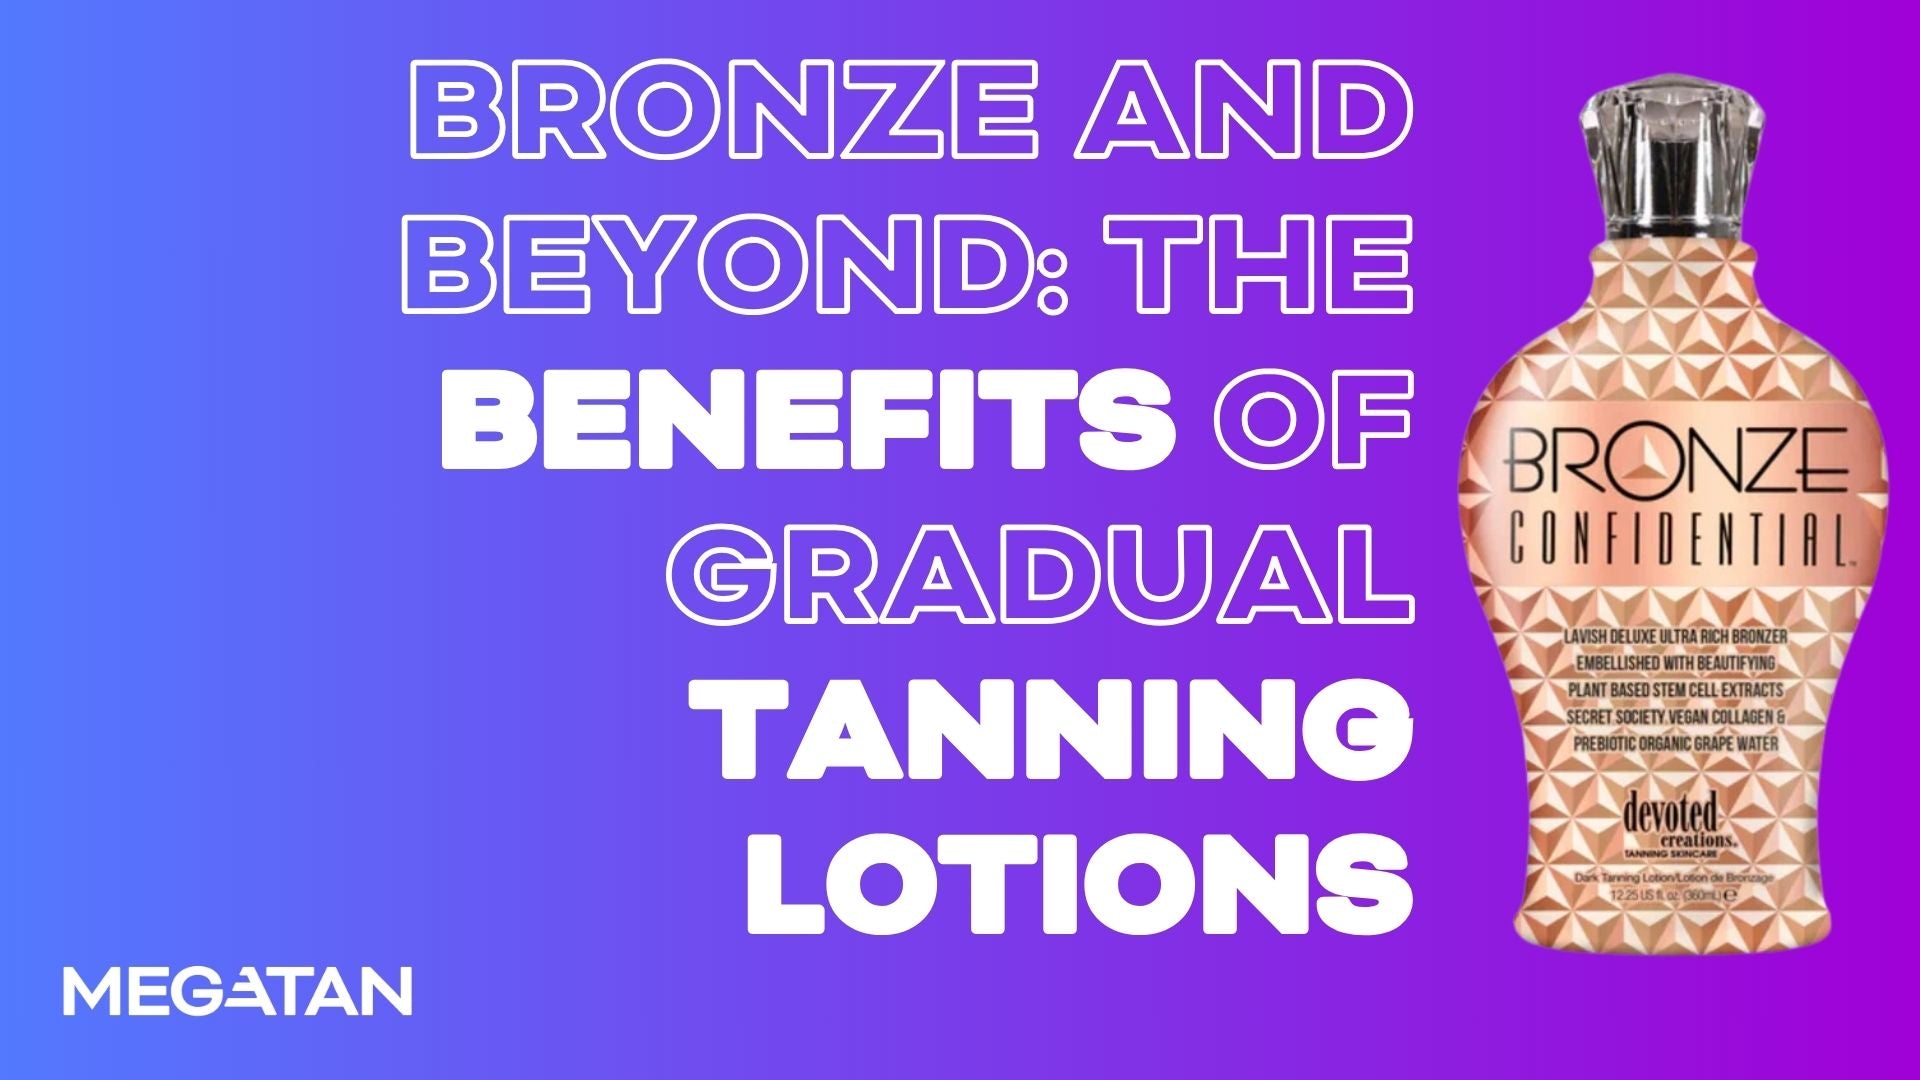 Bronze and Beyond: The Benefits of Gradual Tanning Lotions